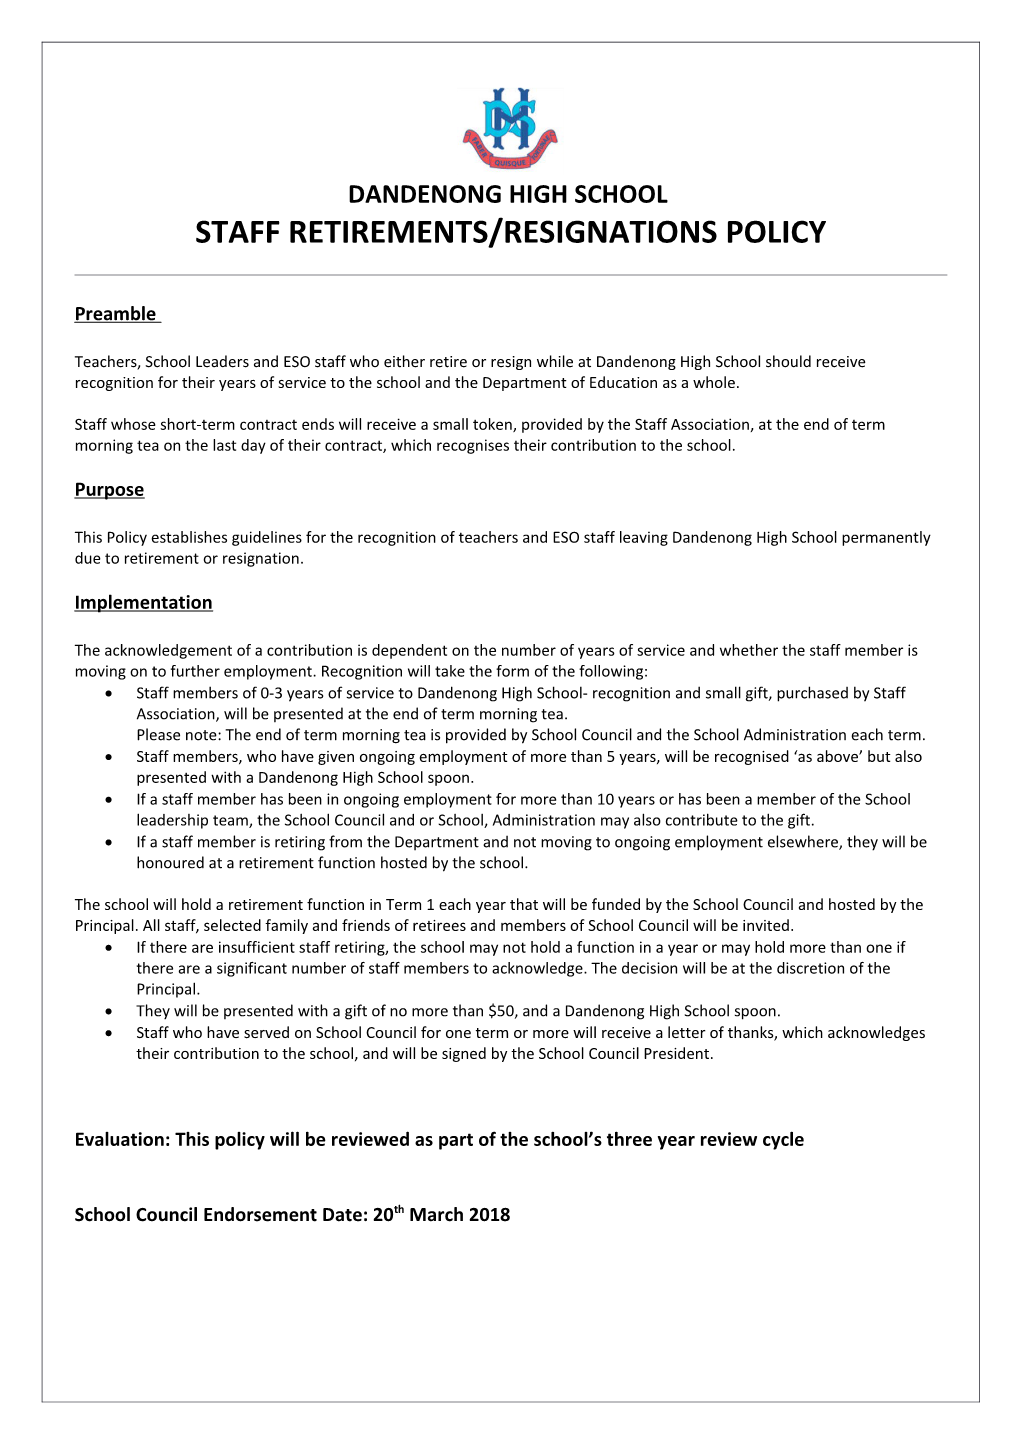 Staff Retirements/Resignations Policy